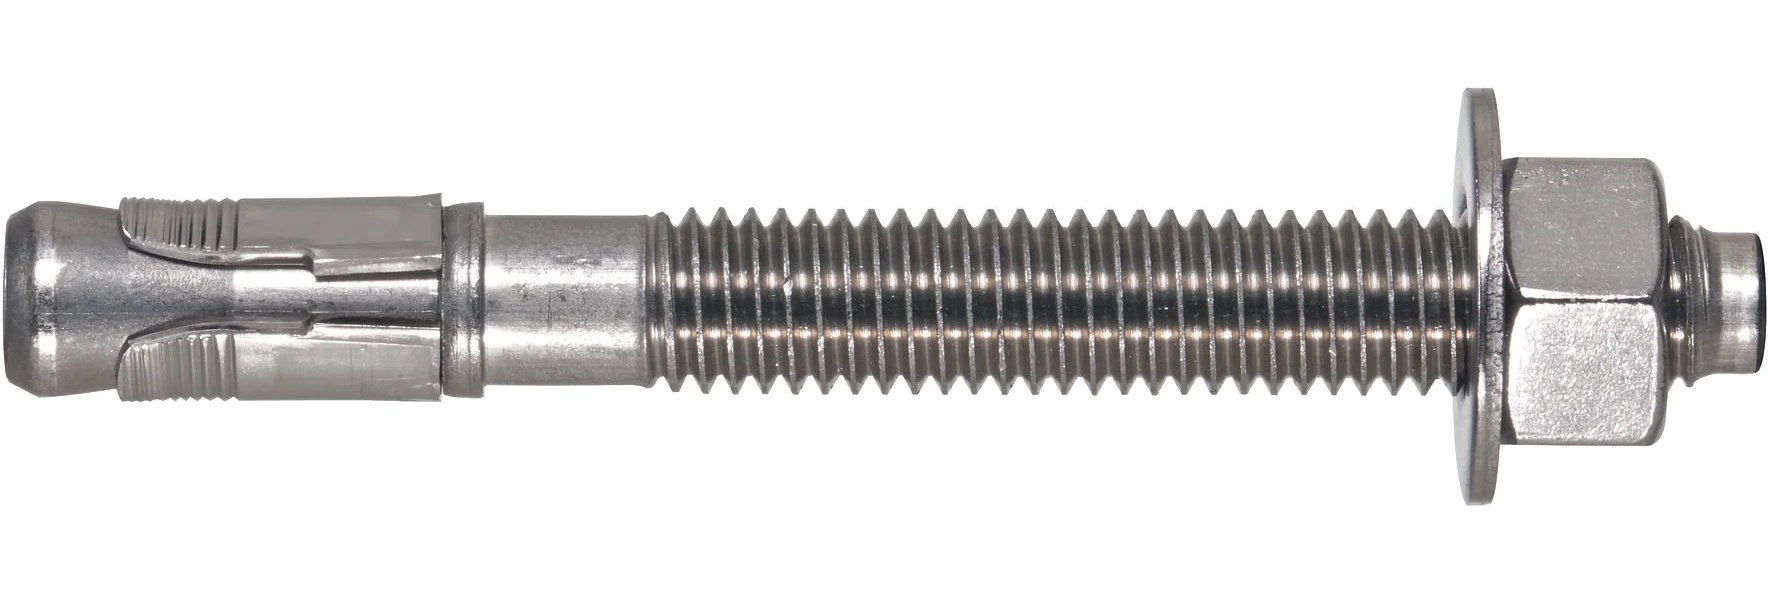 Stud anchor KB3 SS304 1/4x4 1/2 LT (Sold in BOX of 100)